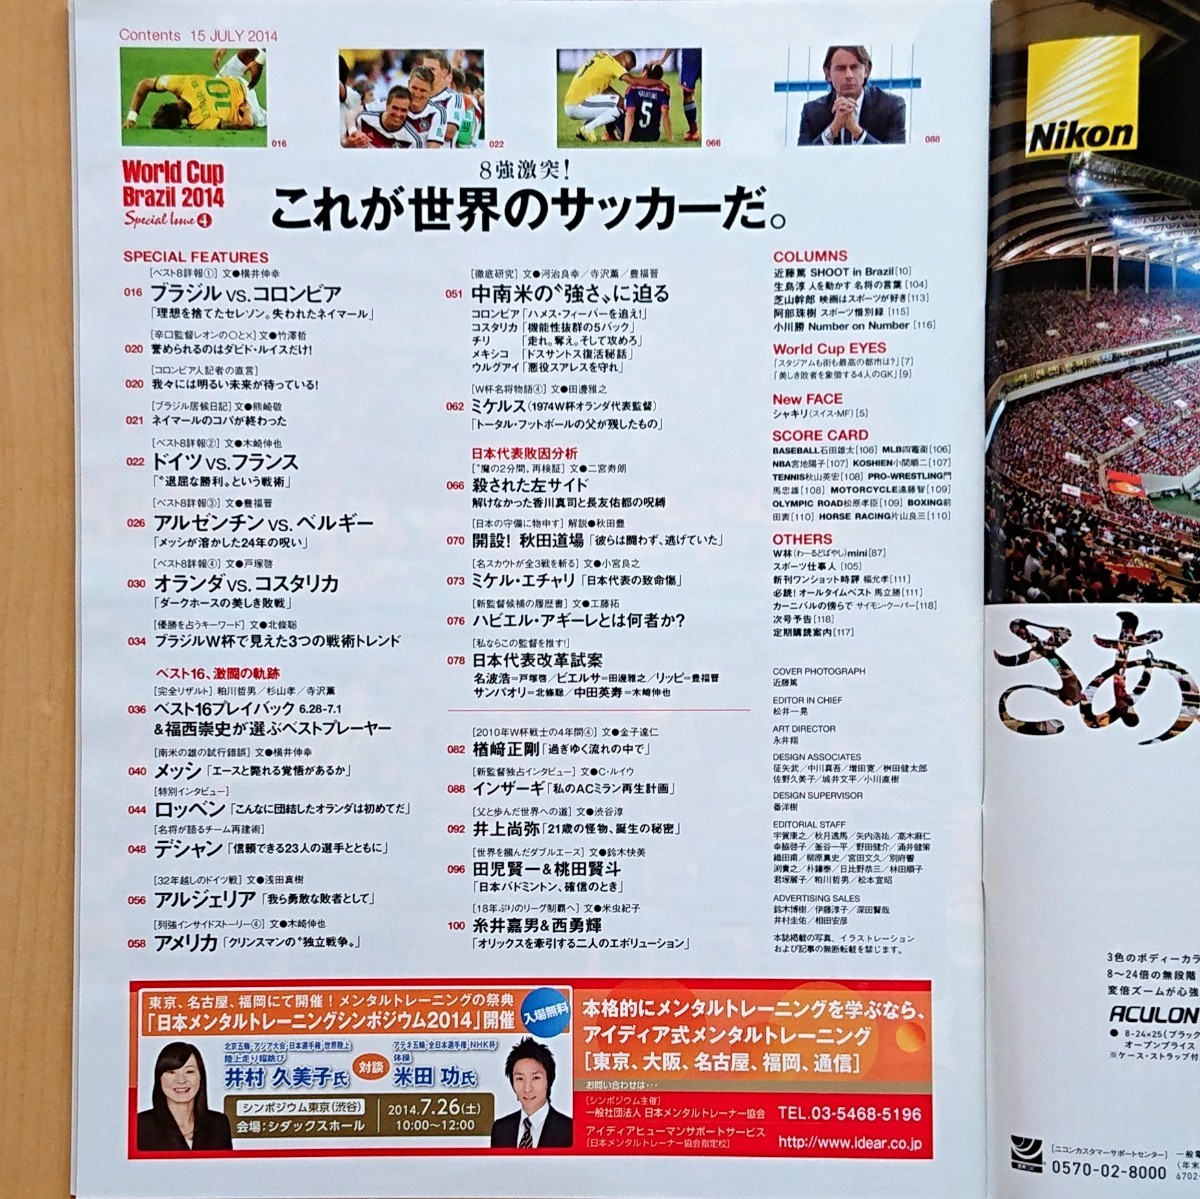 Sports Graphic Number 臨時増刊号 World Cup Brazil 2014 Special Issue ④ 8強激突 Footboal Fantas これが世界のサッカーだ。2014年7/15_画像2